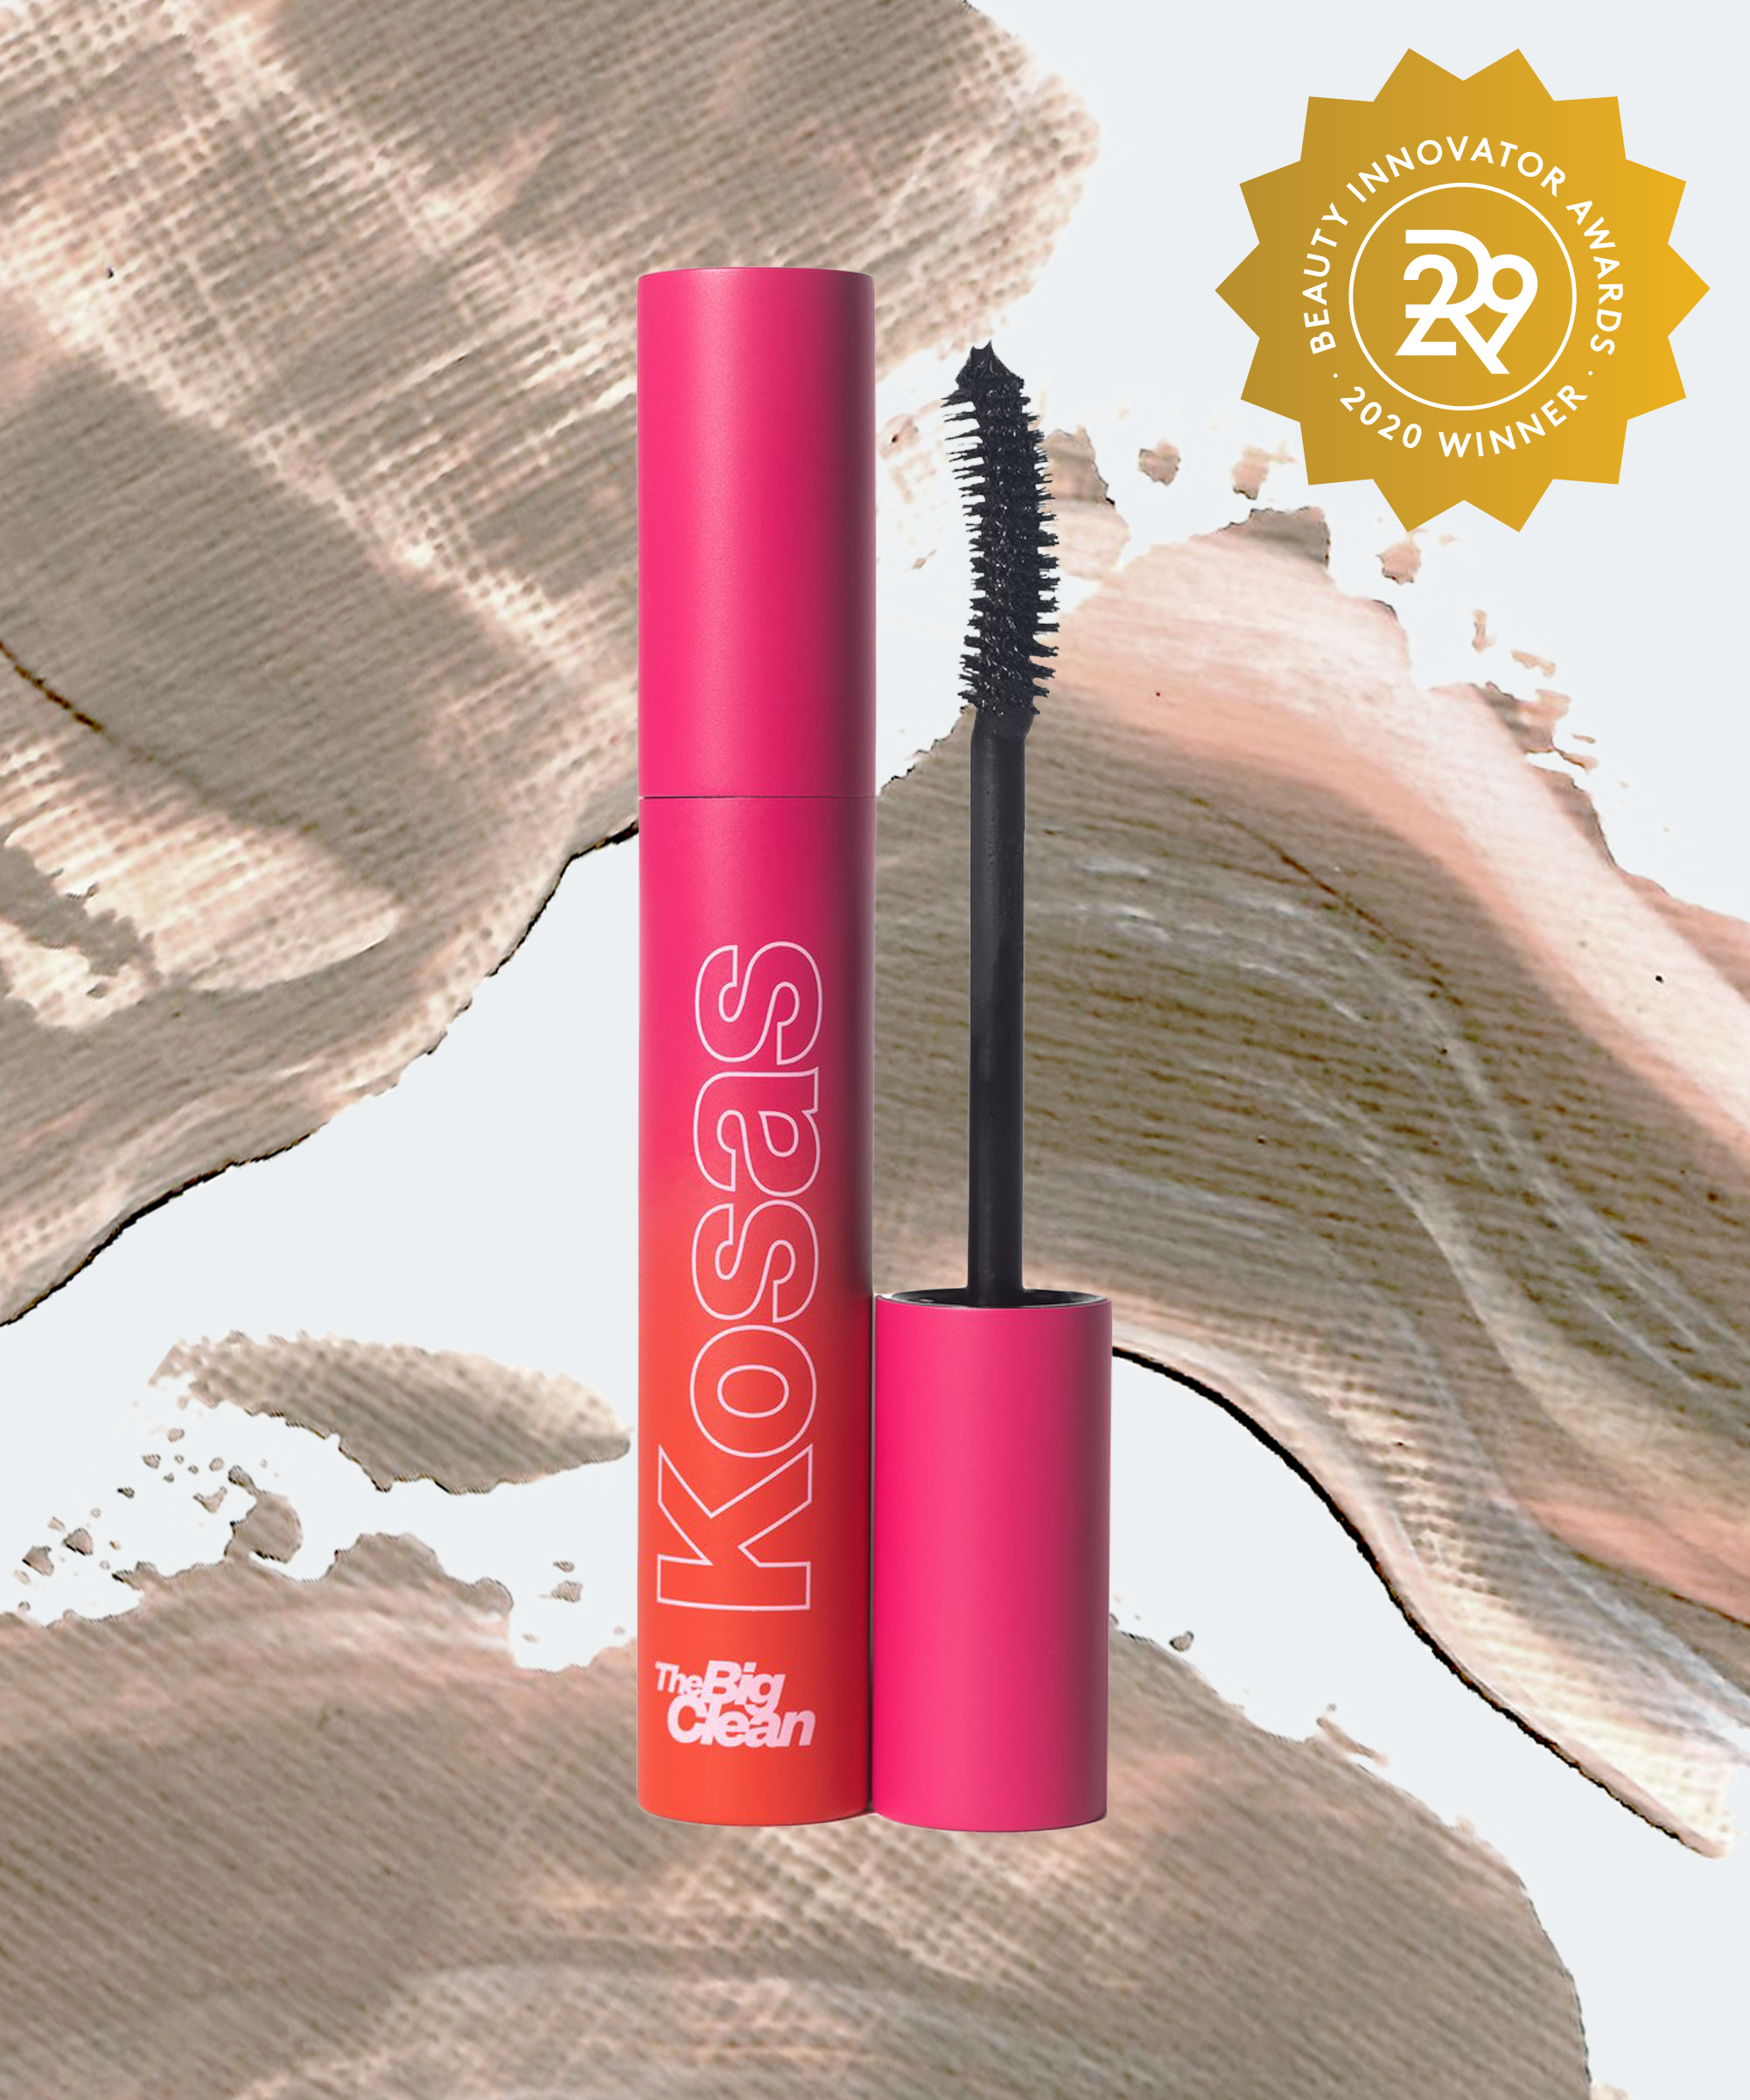 produktion udtale periode Best Mascara 2020 Reviews - Beauty Innovator Awards